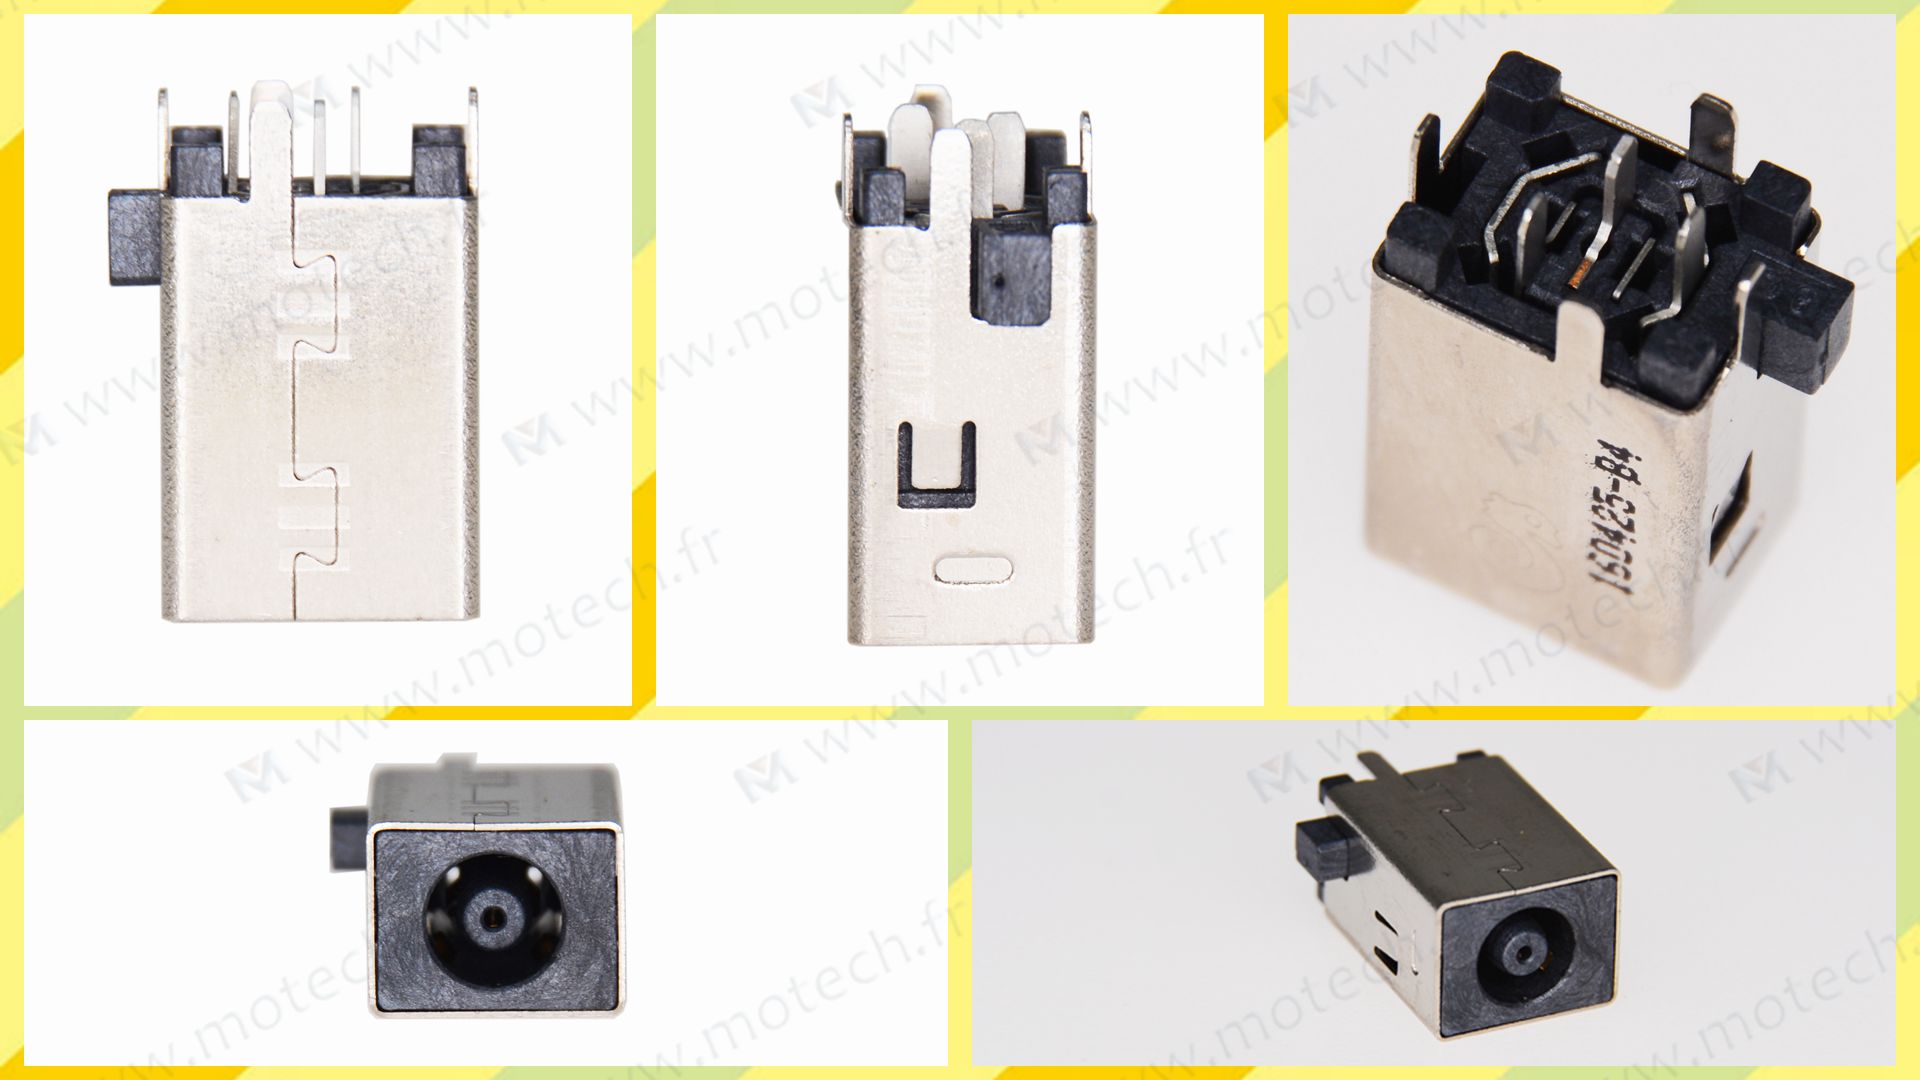 Dell 5459 AIO DC Jack, Dell 5459 AIO Jack alimentation, Dell 5459 AIO Power Jack, Dell 5459 AIO Prise Connecteur, Dell 5459 AIO Connecteur alimentation, Dell 5459 AIO connecteur de charge, 